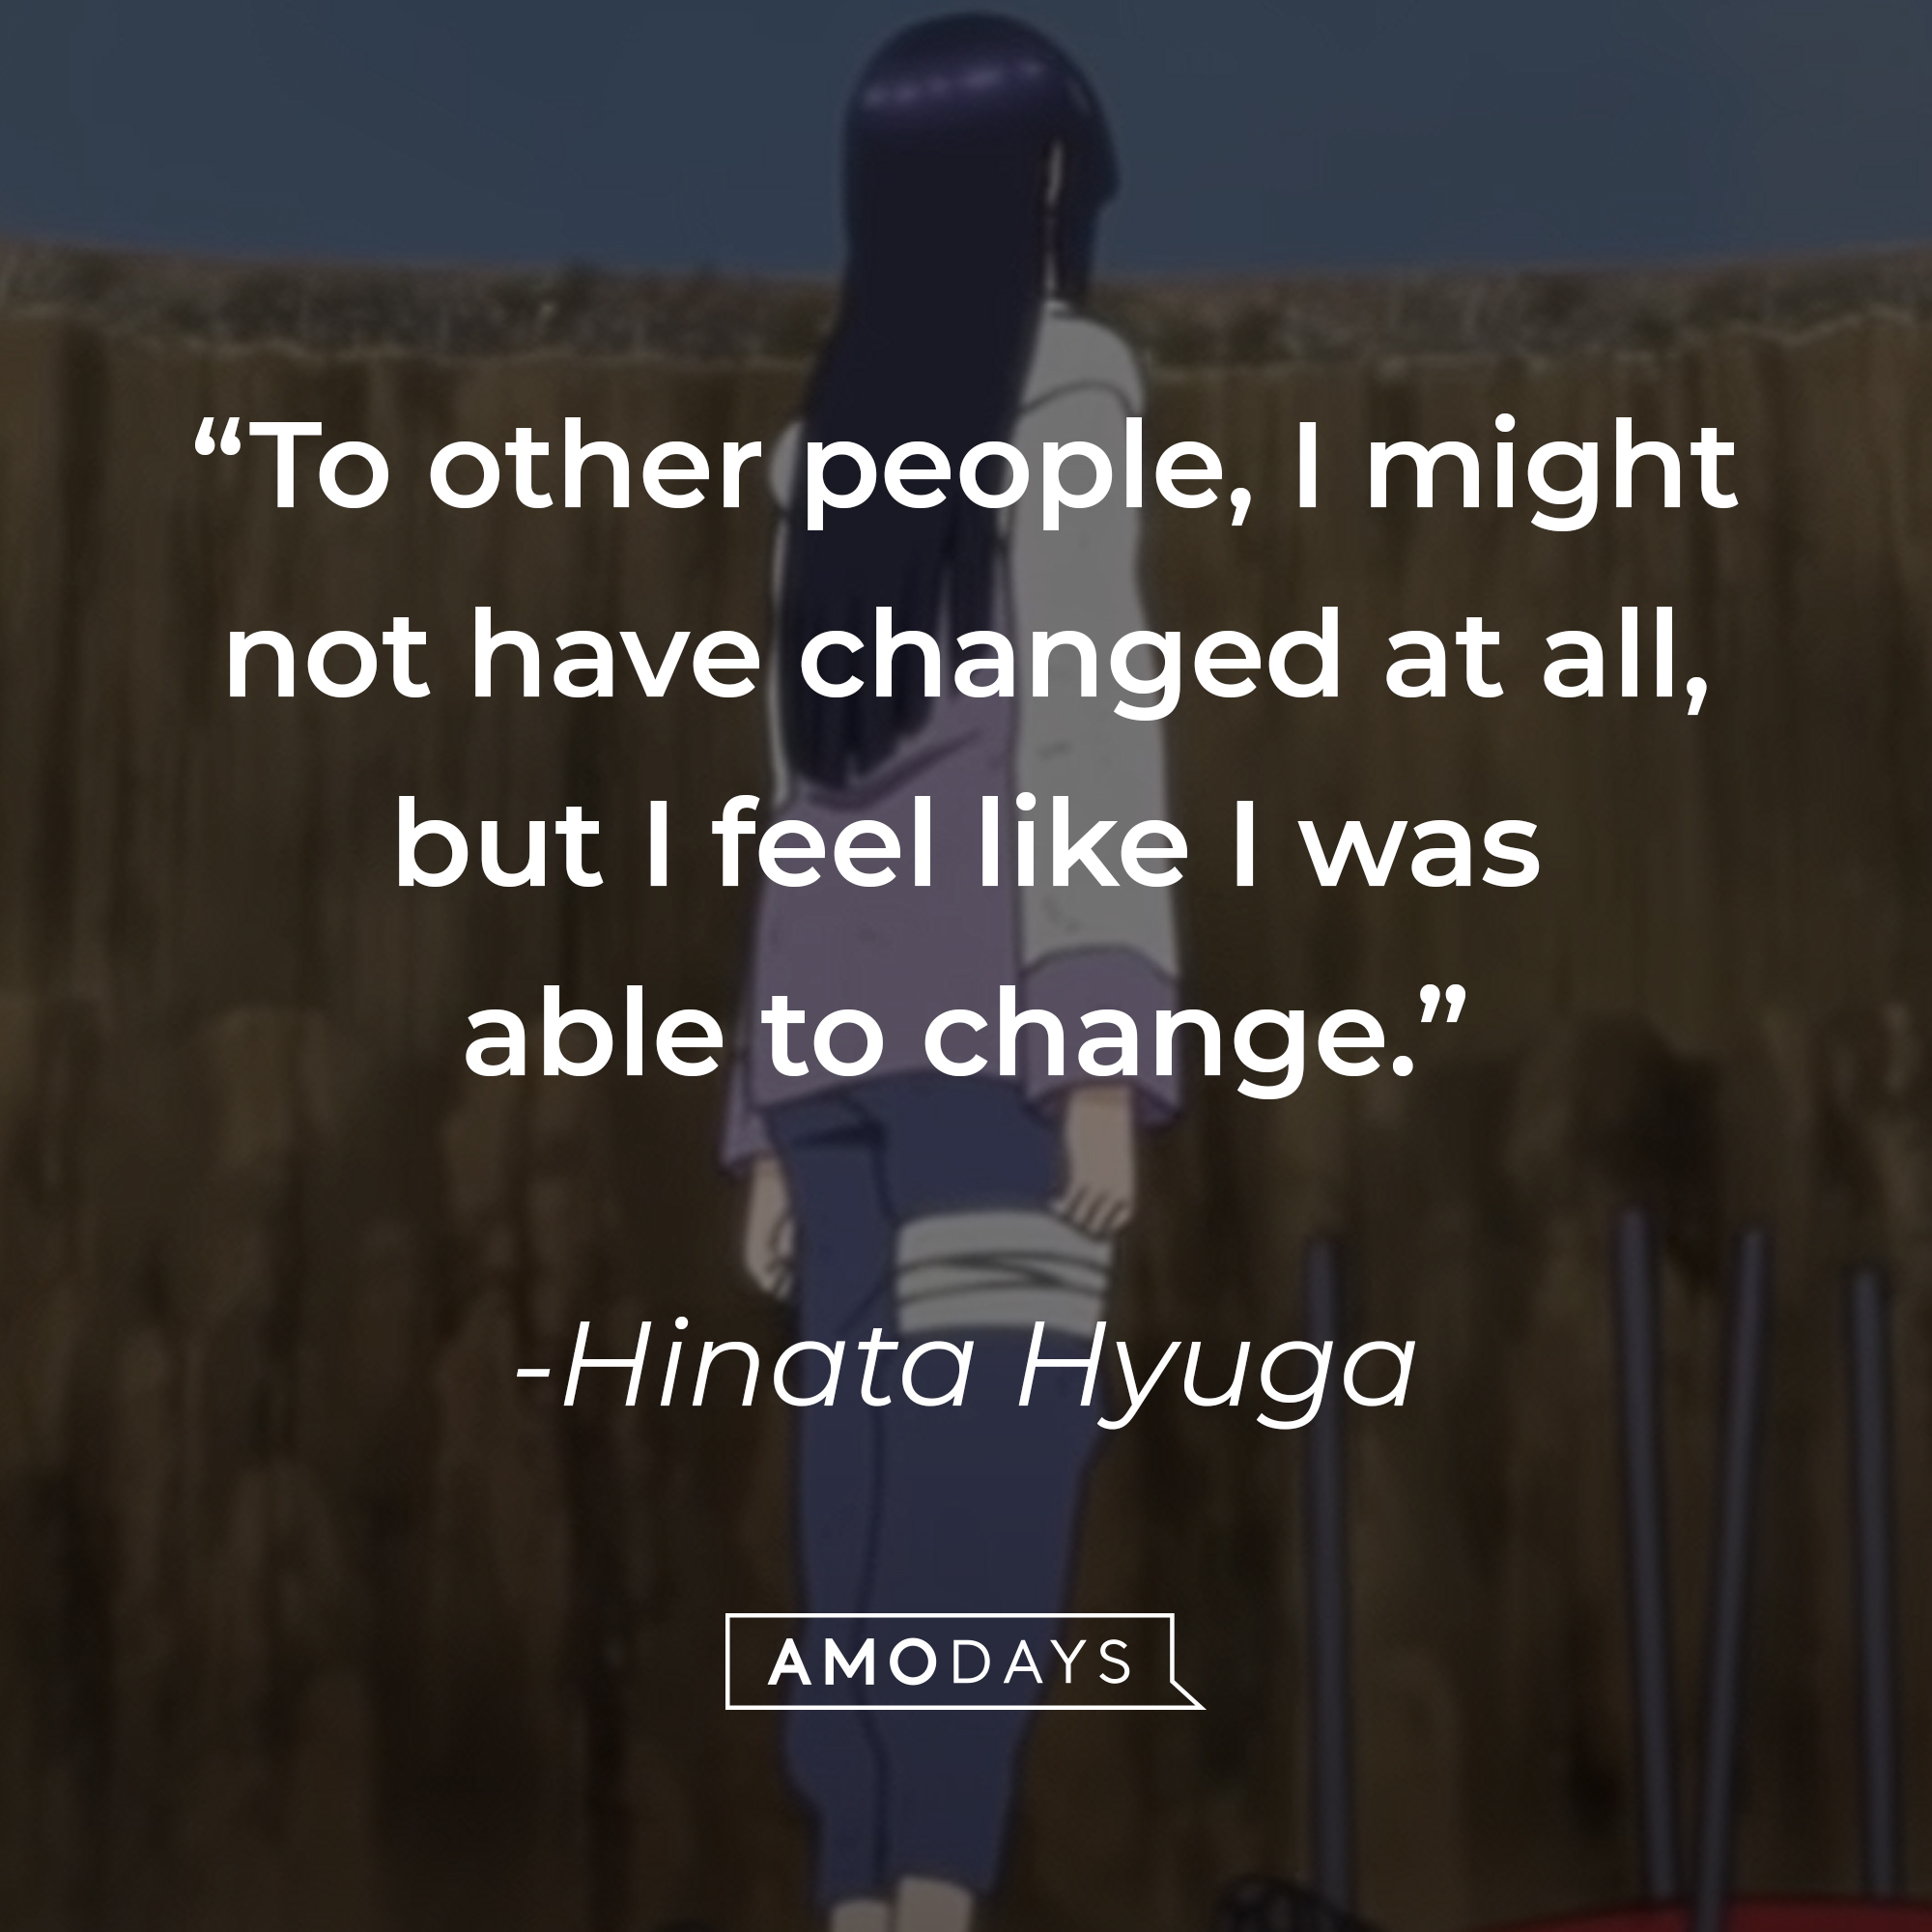 Hinata Hyuga with her quote:  "To other people, I might not have changed at all, but I feel like I was able to change.” | Source: youtube.com/CrunchyrollCollection